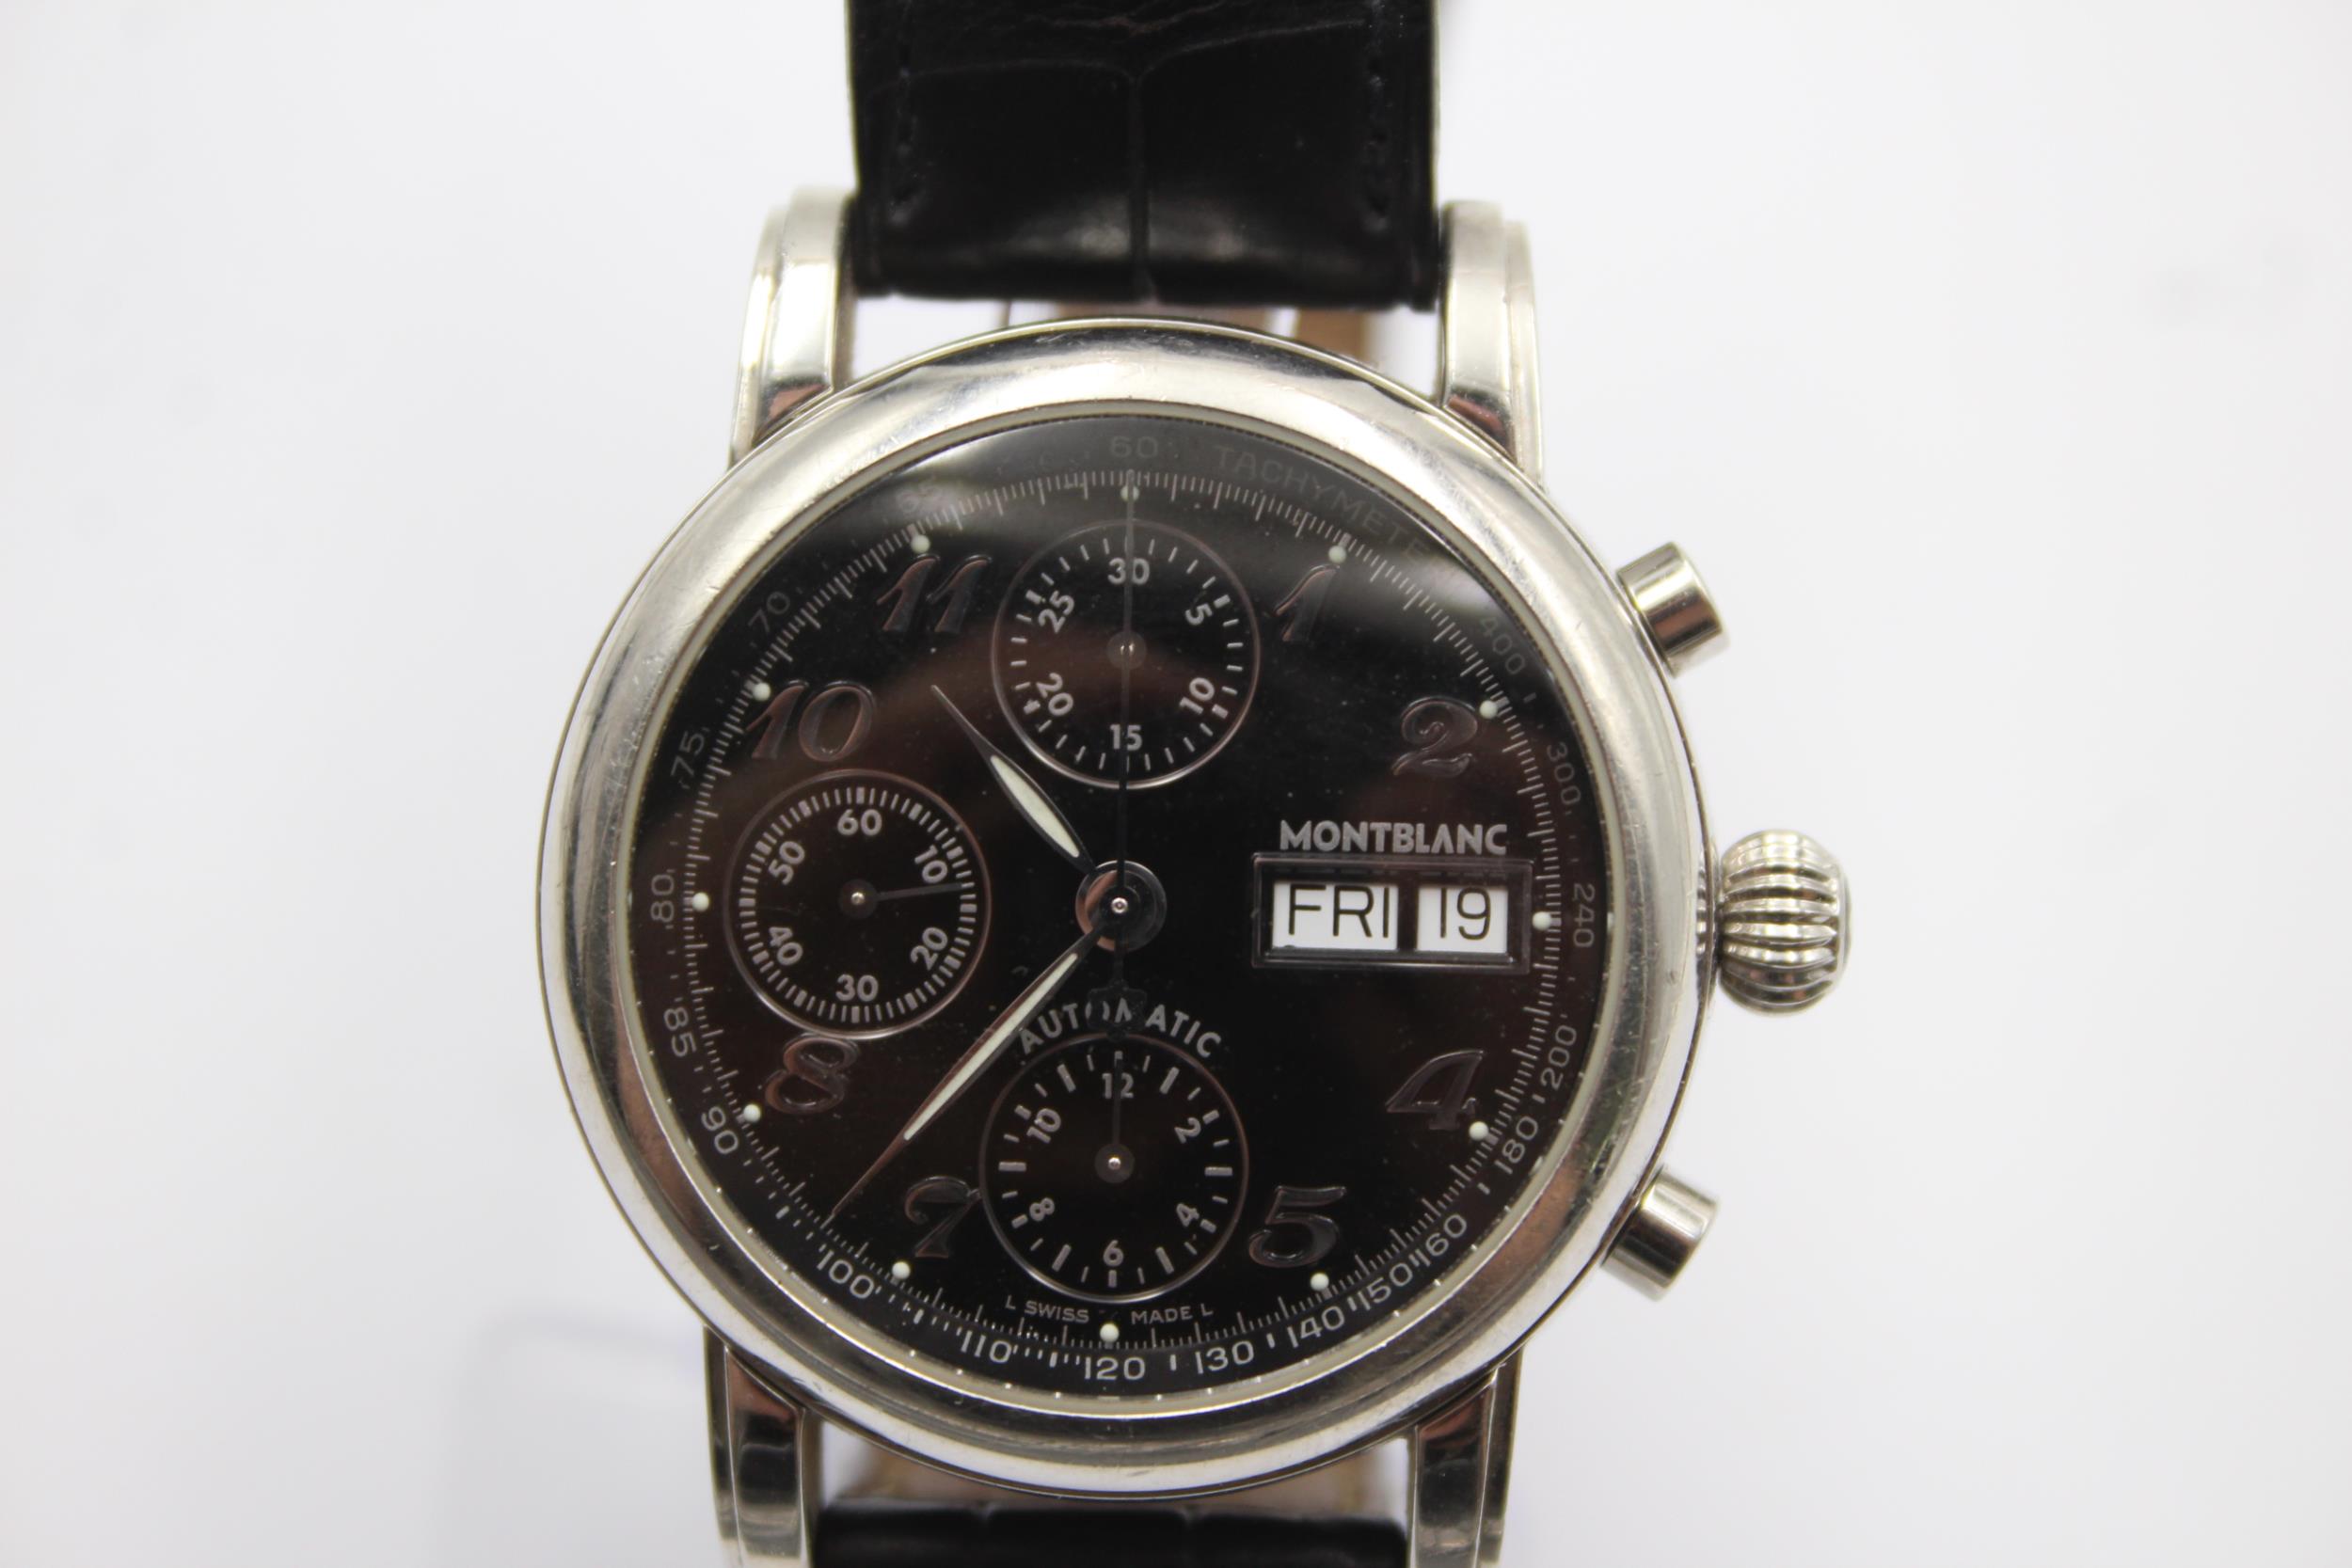 Gents MONTBLANC Meisterstruck Star Chronograph 7019 Automatic WRISTWATCH WORKING - Image 2 of 4